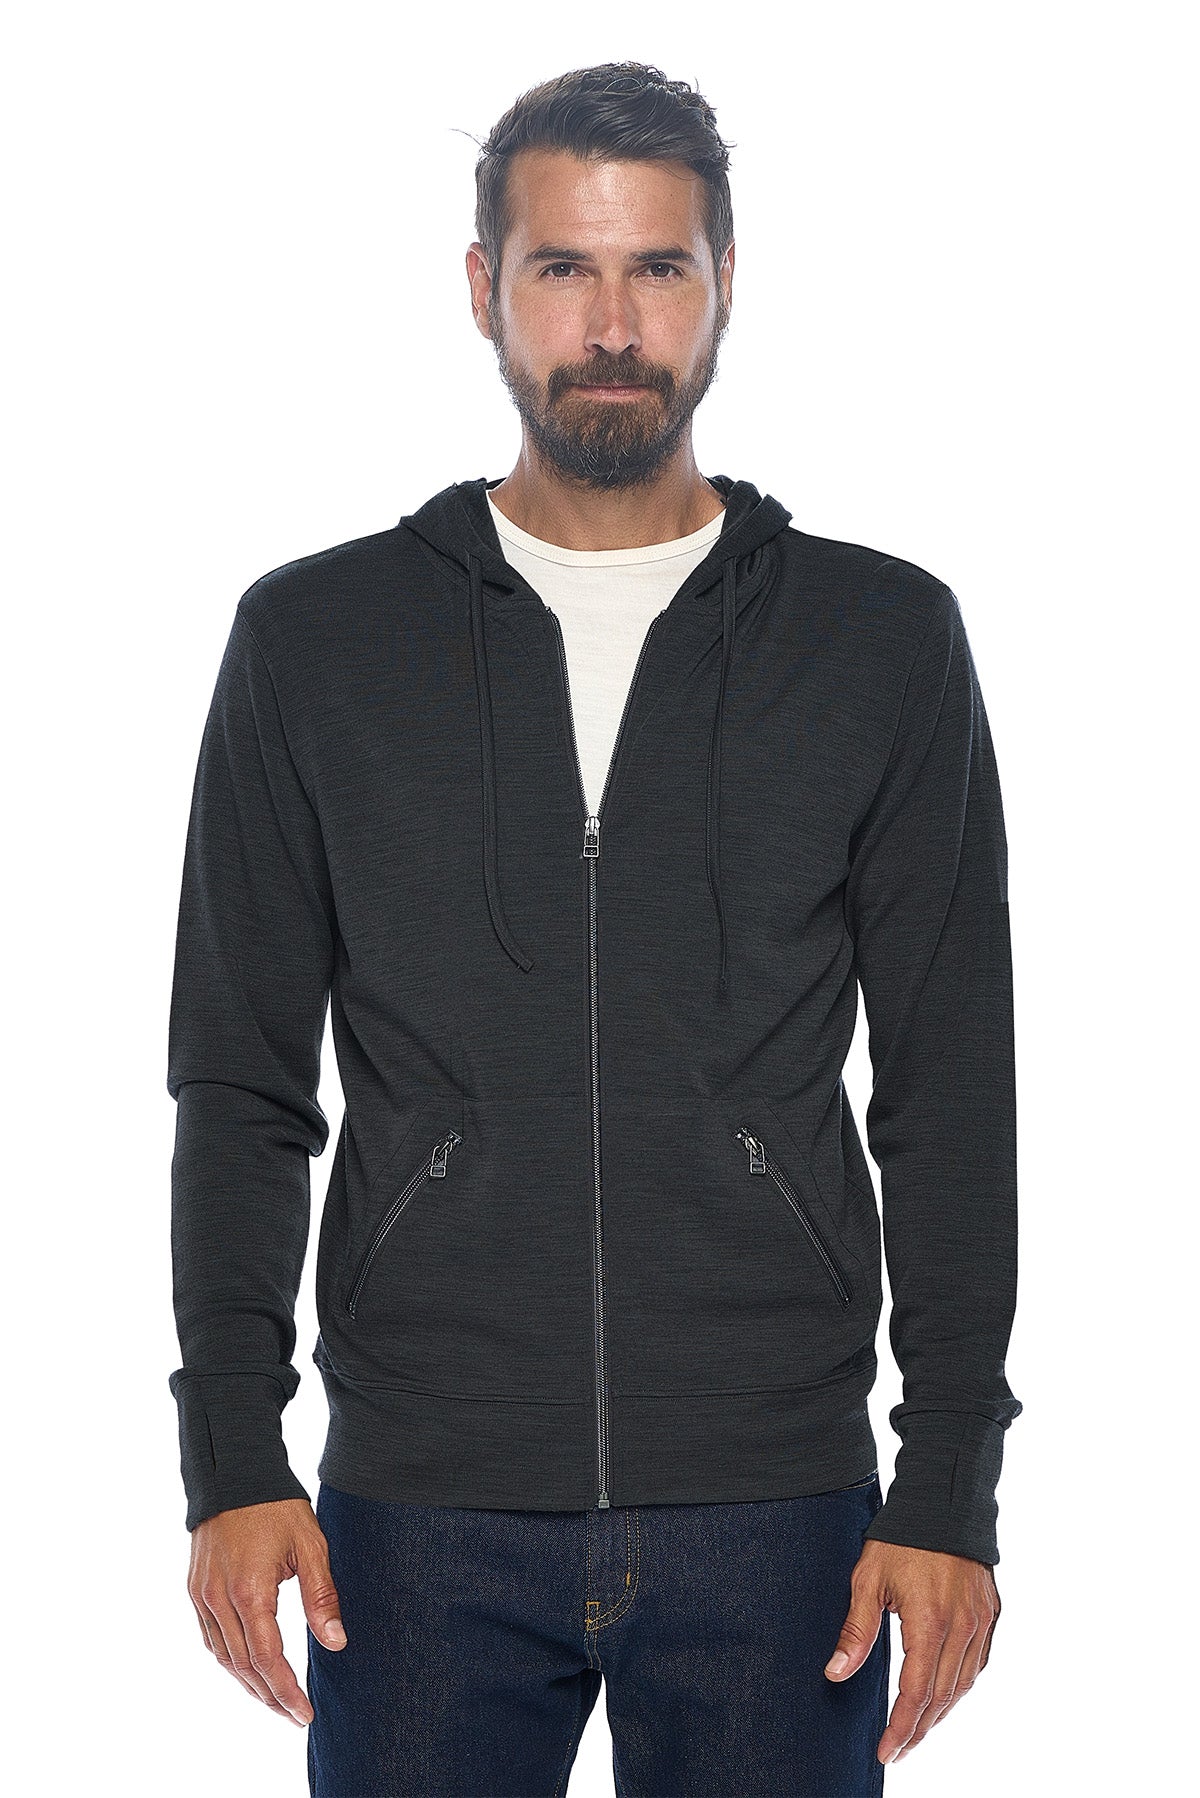 Men's Merino Wool First Class Travel Hoodie | Made in The USA 3 / Black